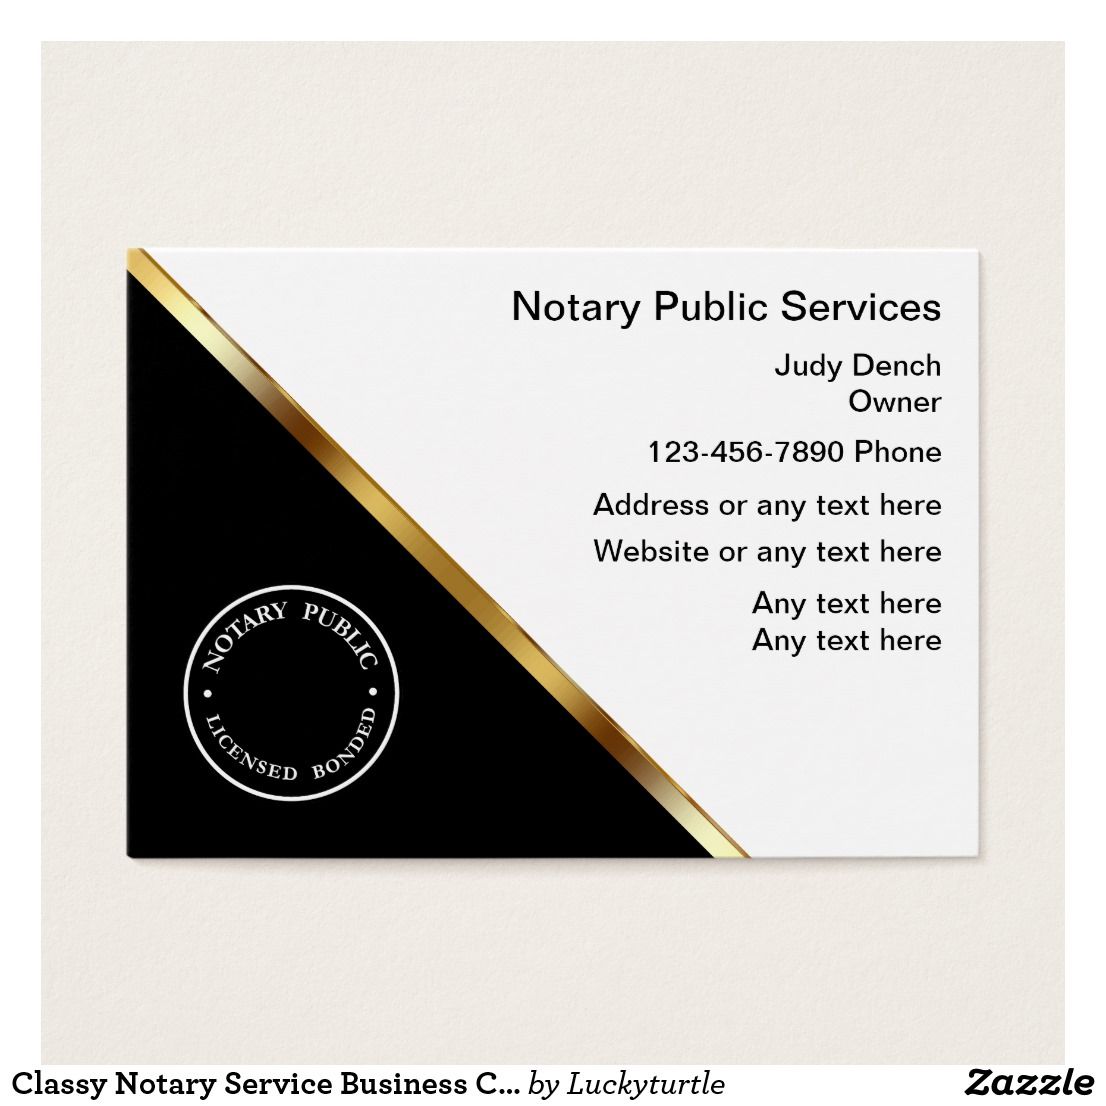 sample notary public business cards 1